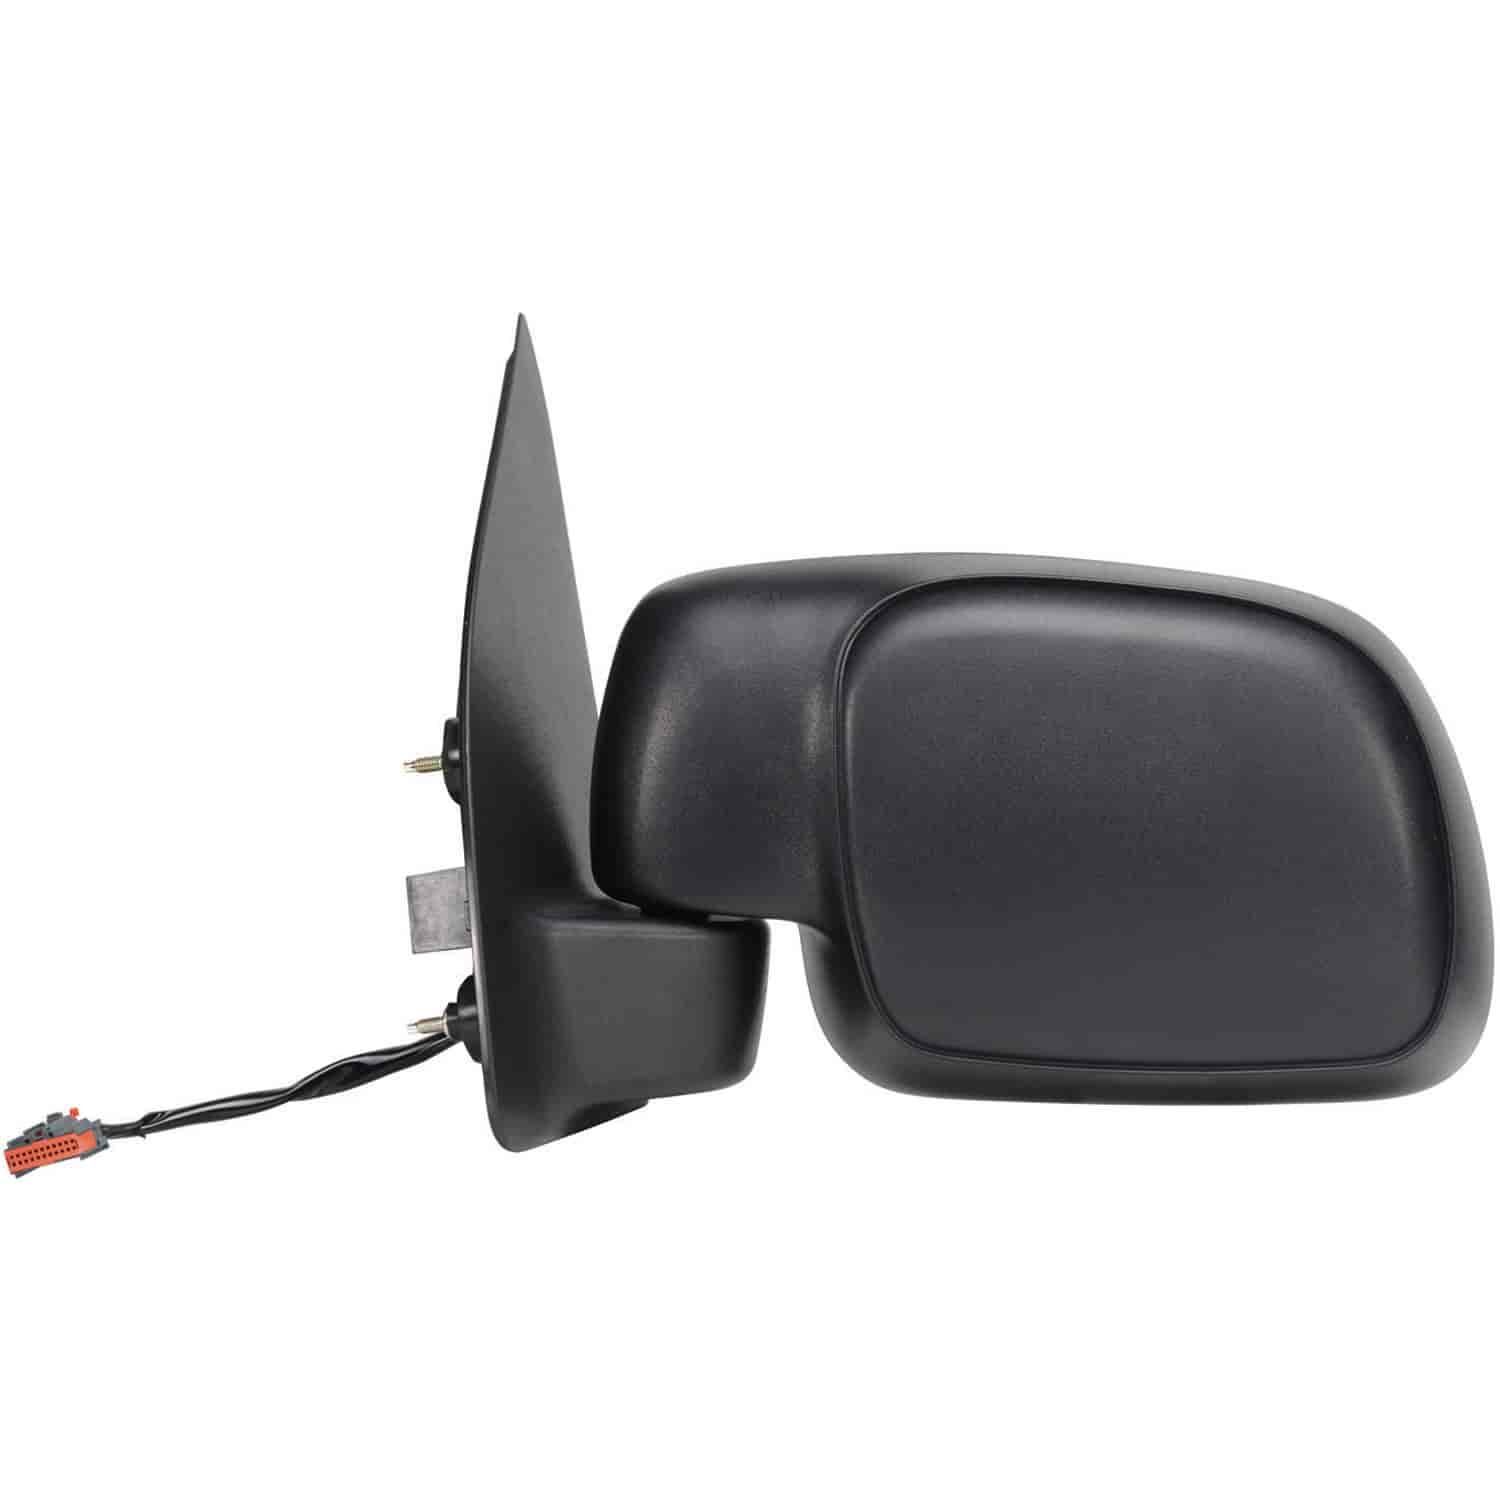 OEM Style Replacement mirror for 08-11 Ford F250/ F350/ F450/ F550 Super Duty Pick-Up driver side mi